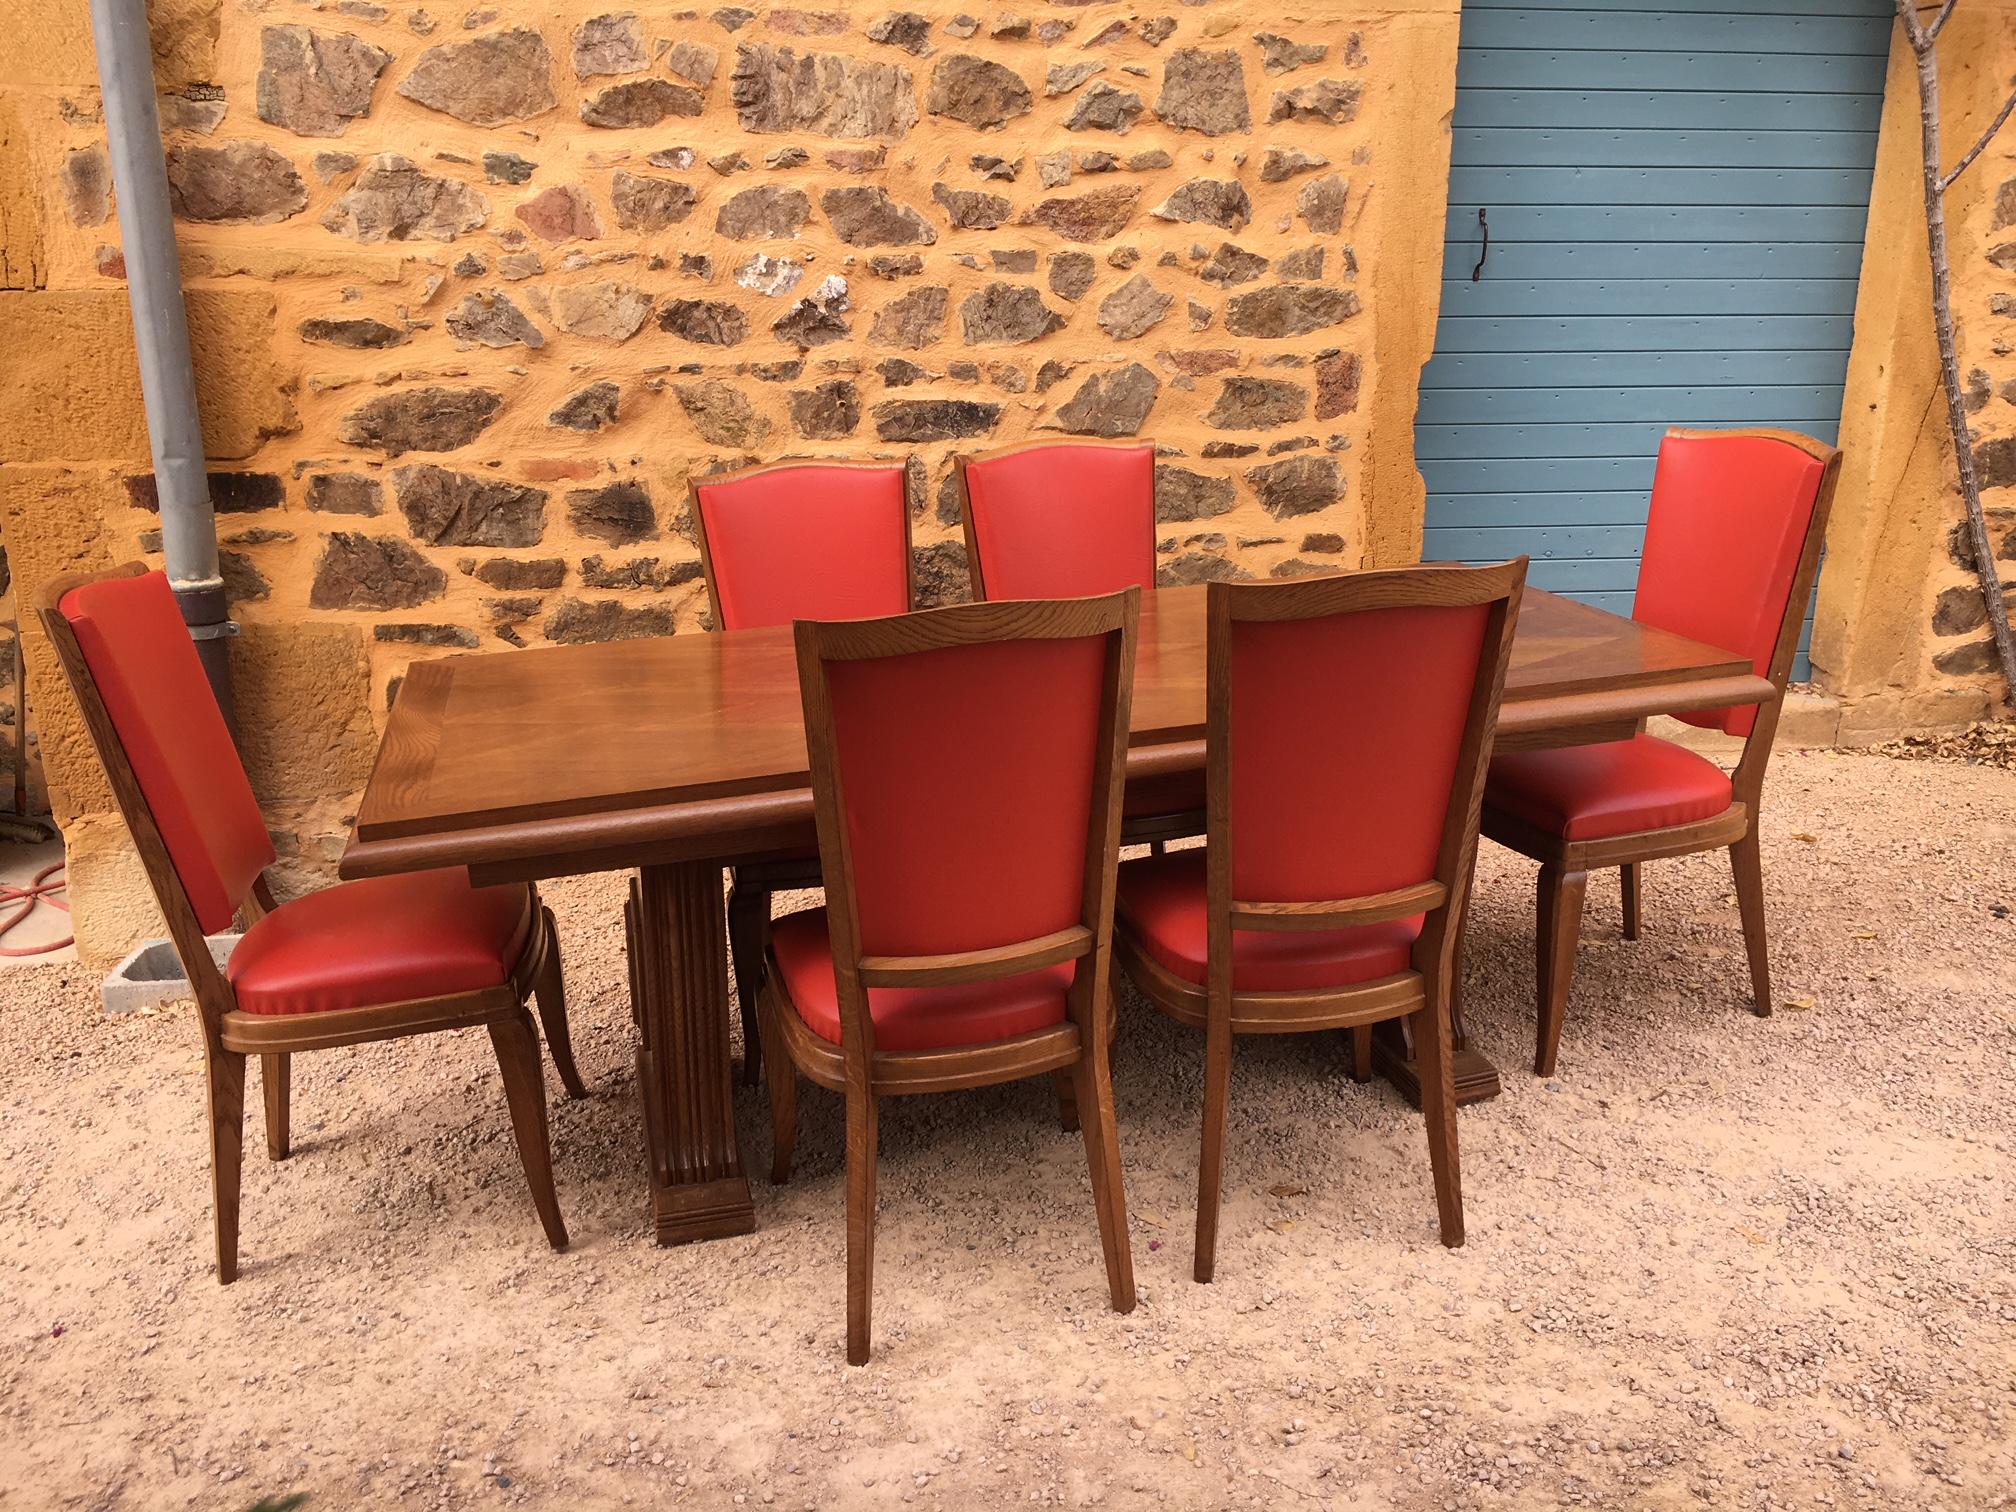 French table with 6 chairs in the style of Maxime Old from the 1940s.
Bronze details on the table feet. There are two extensions with the table.
Good condition. The chairs are also in good condition. The chairs are made with a red skai fabric.